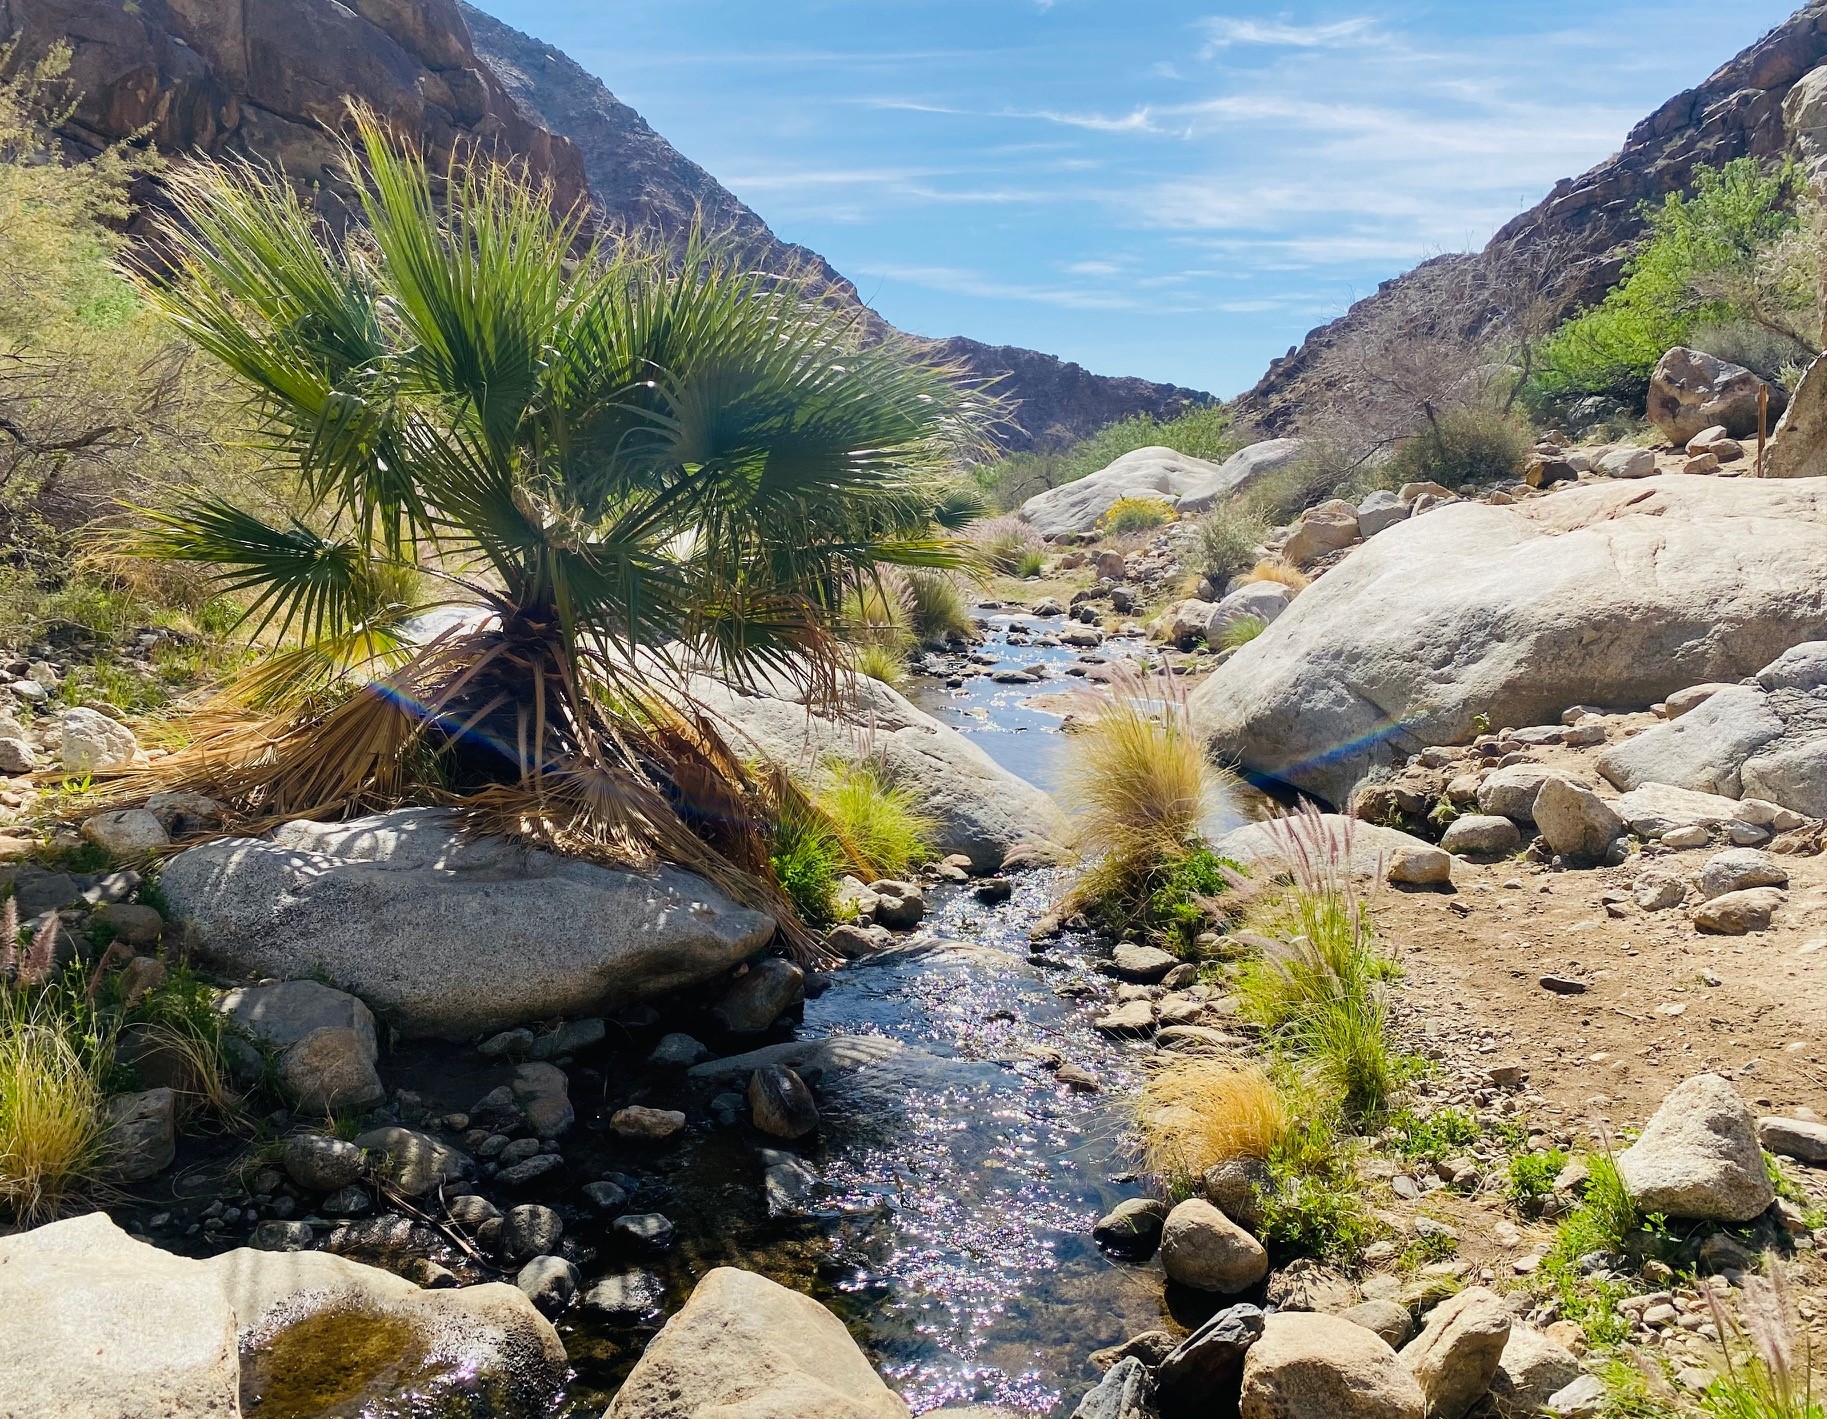 I hiked to a surreal California desert oasis, then two more. Now I must